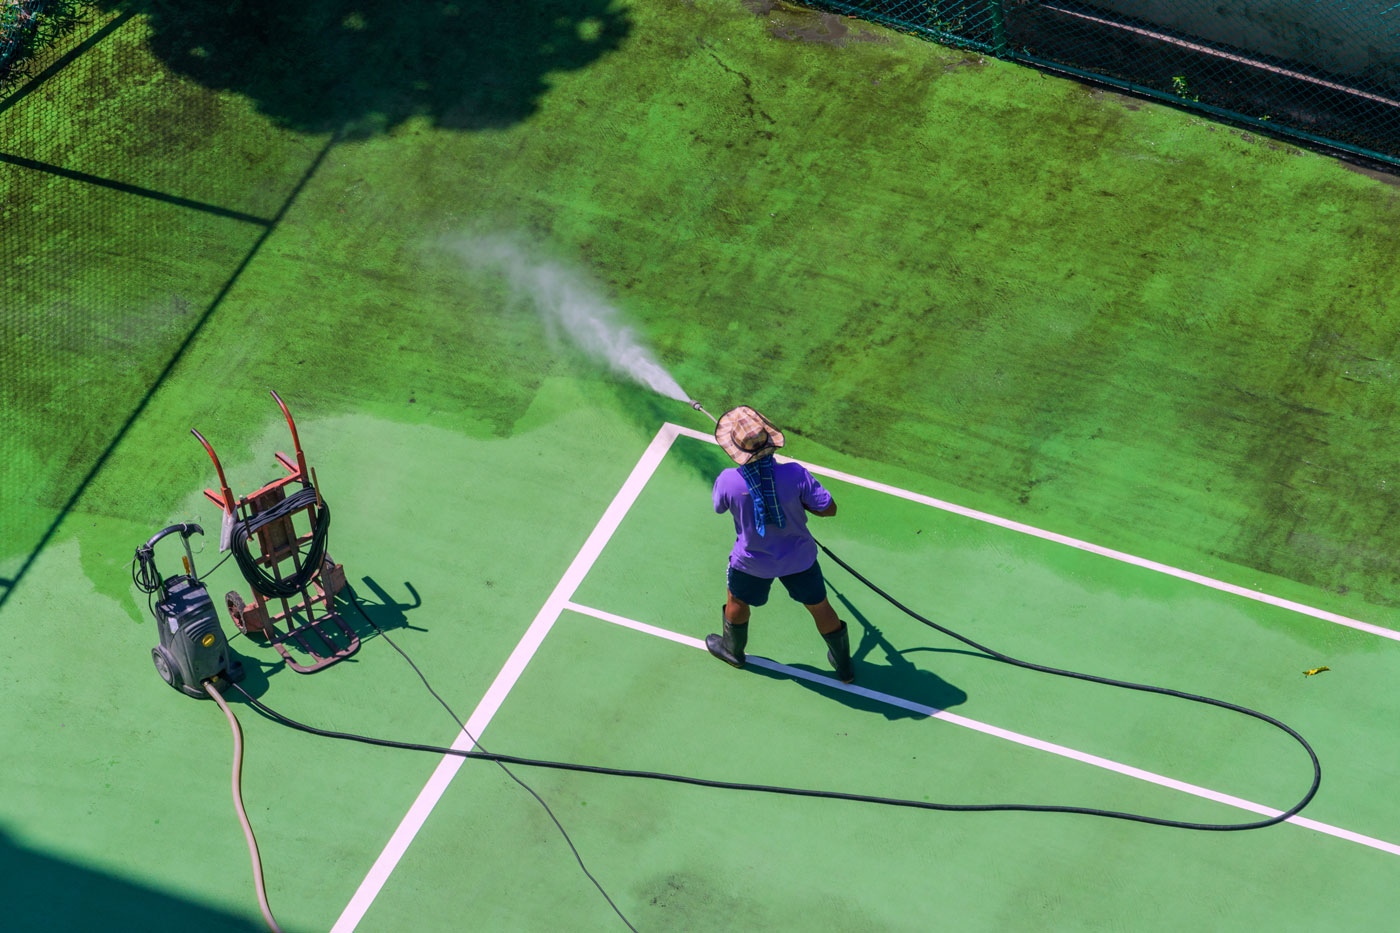 1st Choice High Pressure Cleaning | Tennis Courts Cleaning